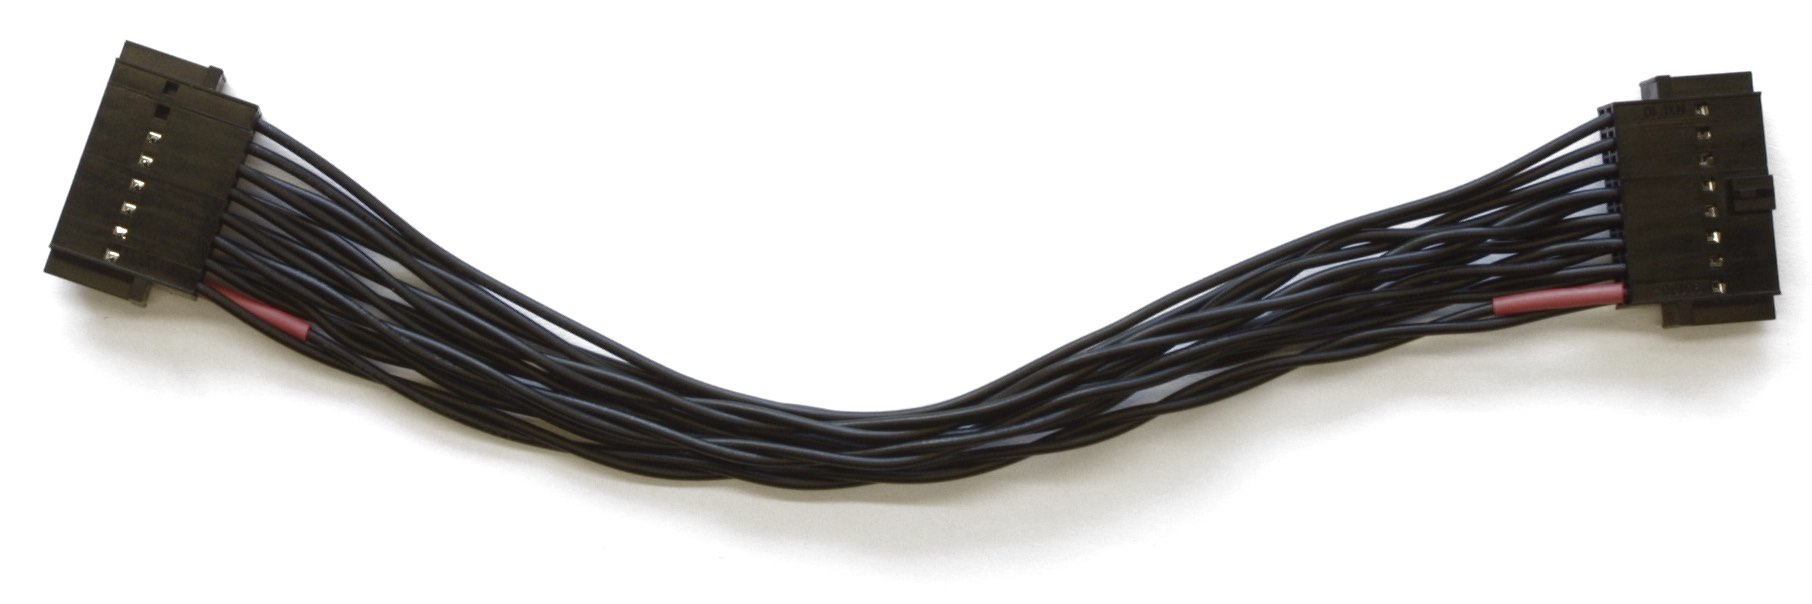 16 pin power cable